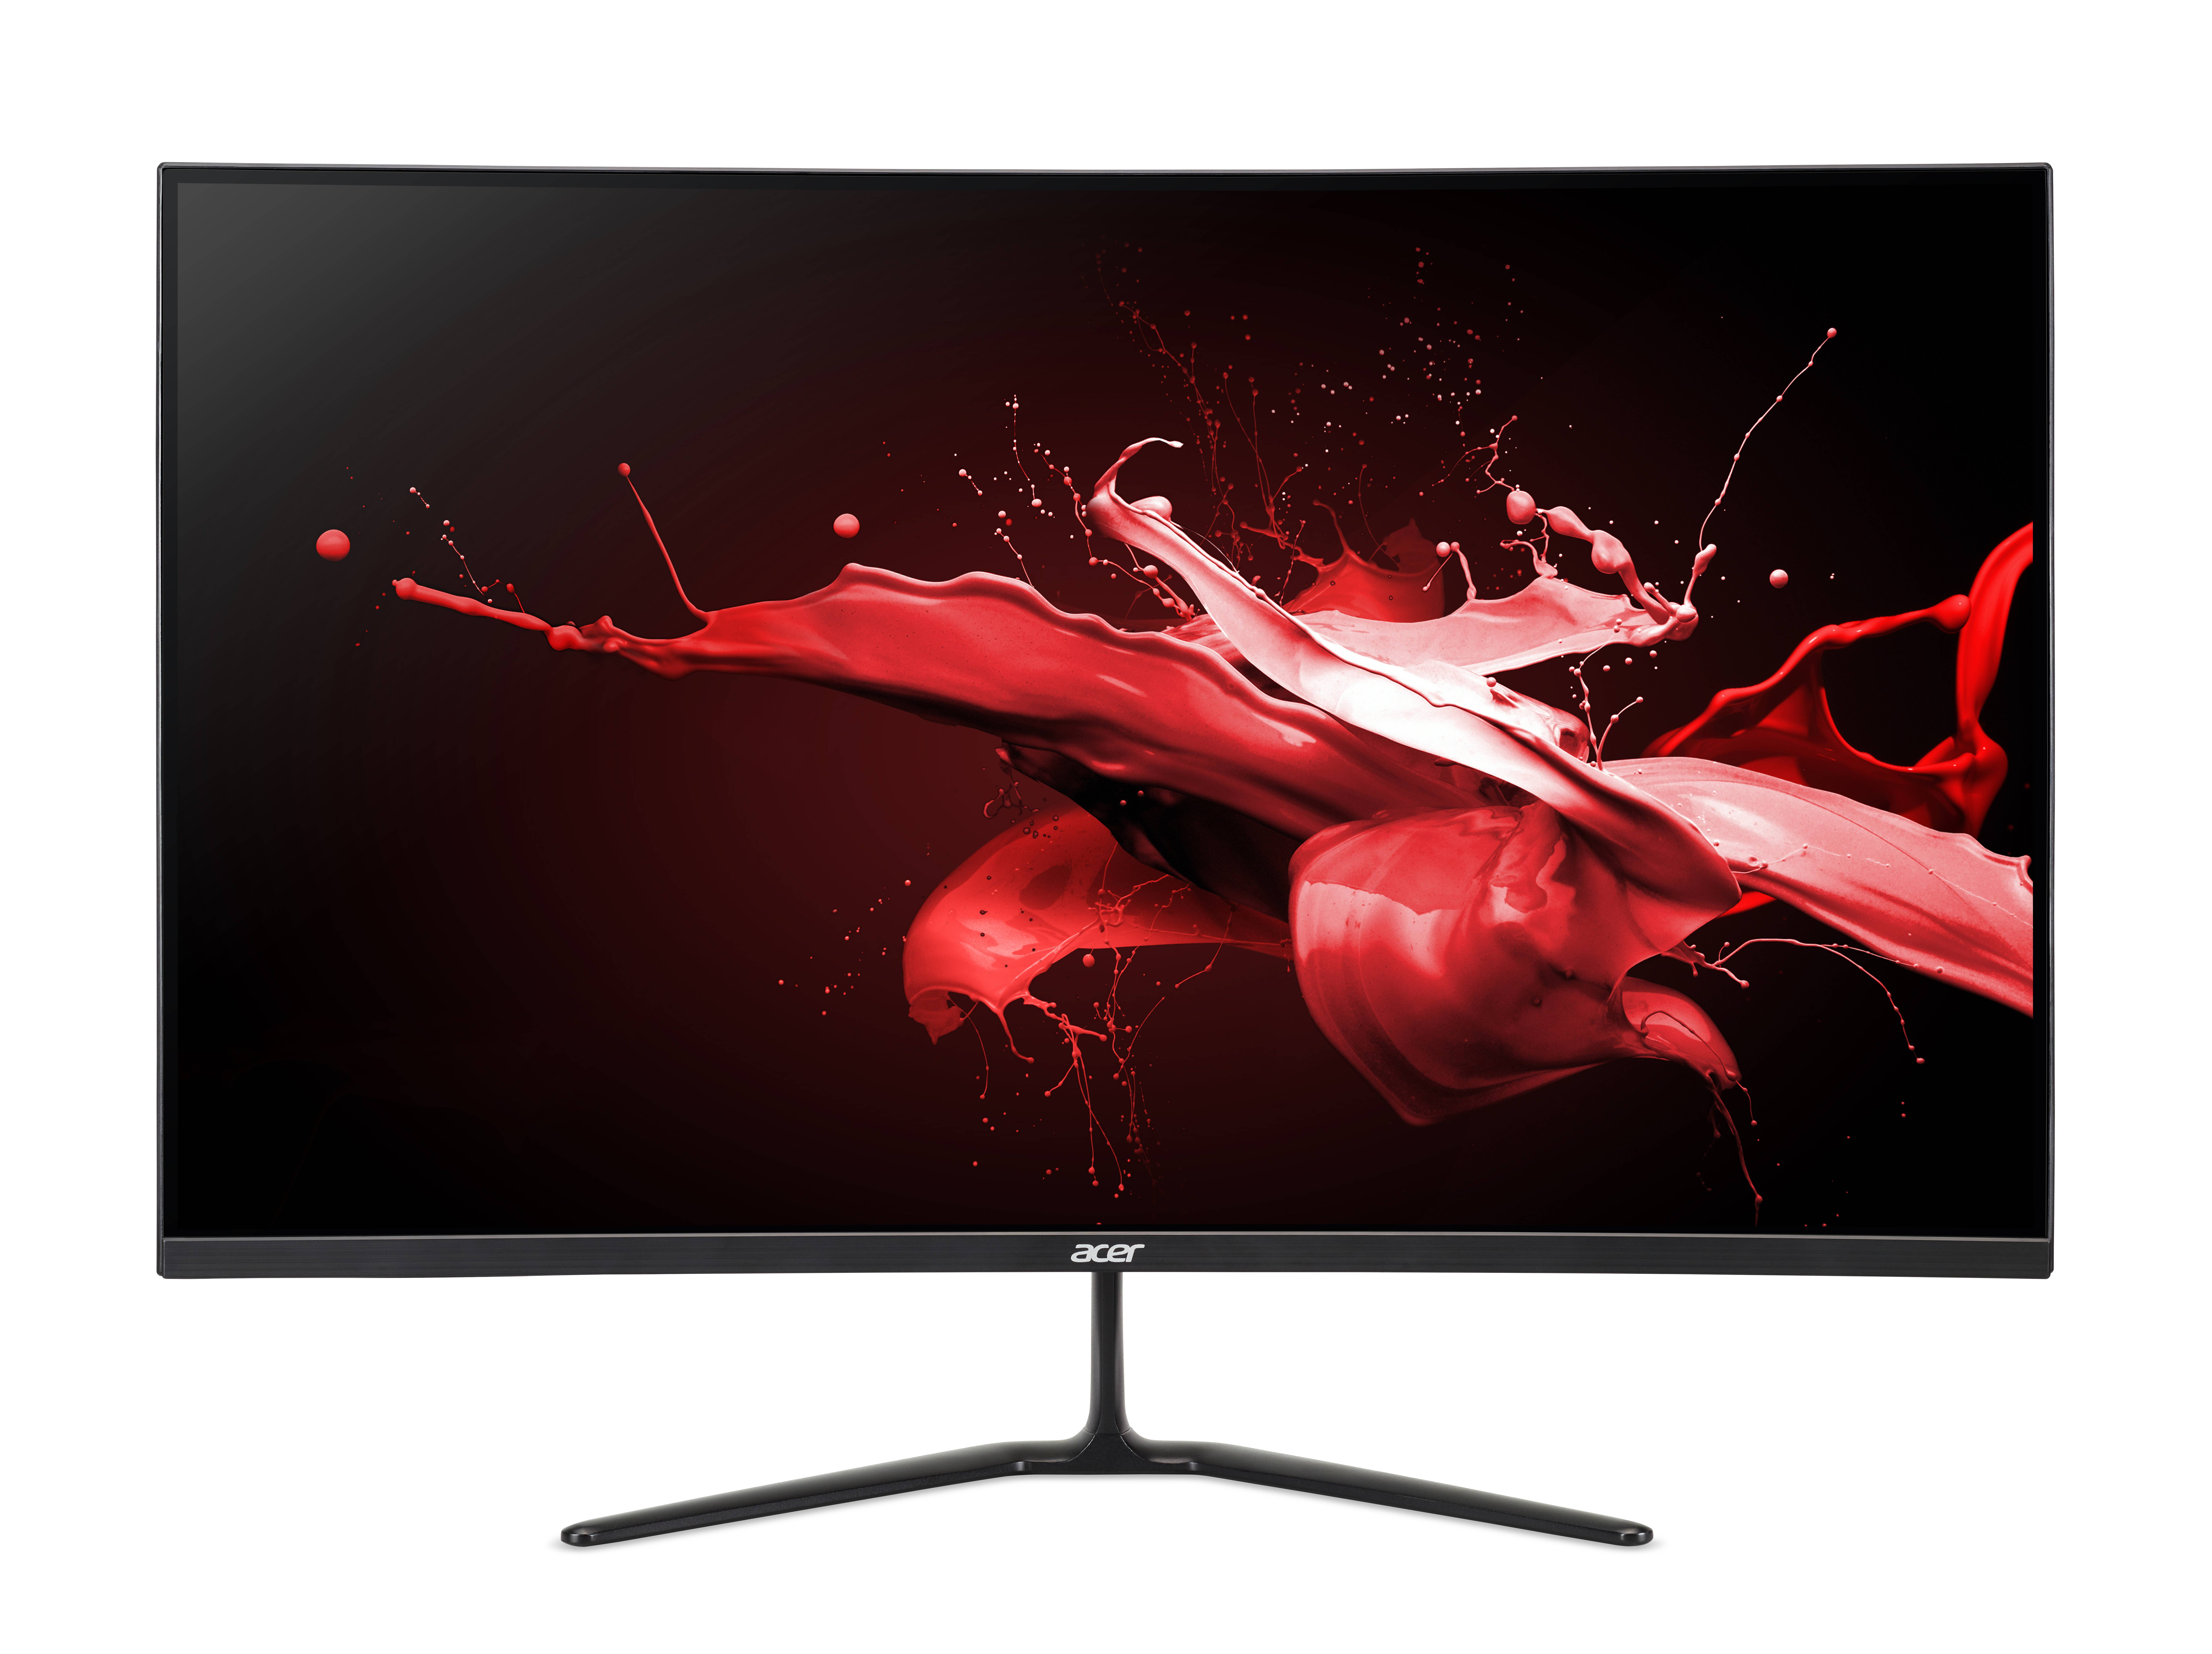 Acer Nitro 31.5" 1500R Curved Full HD (1920 x 1080) Gaming Monitor, Black, ED320QR S3biipx - image 4 of 8